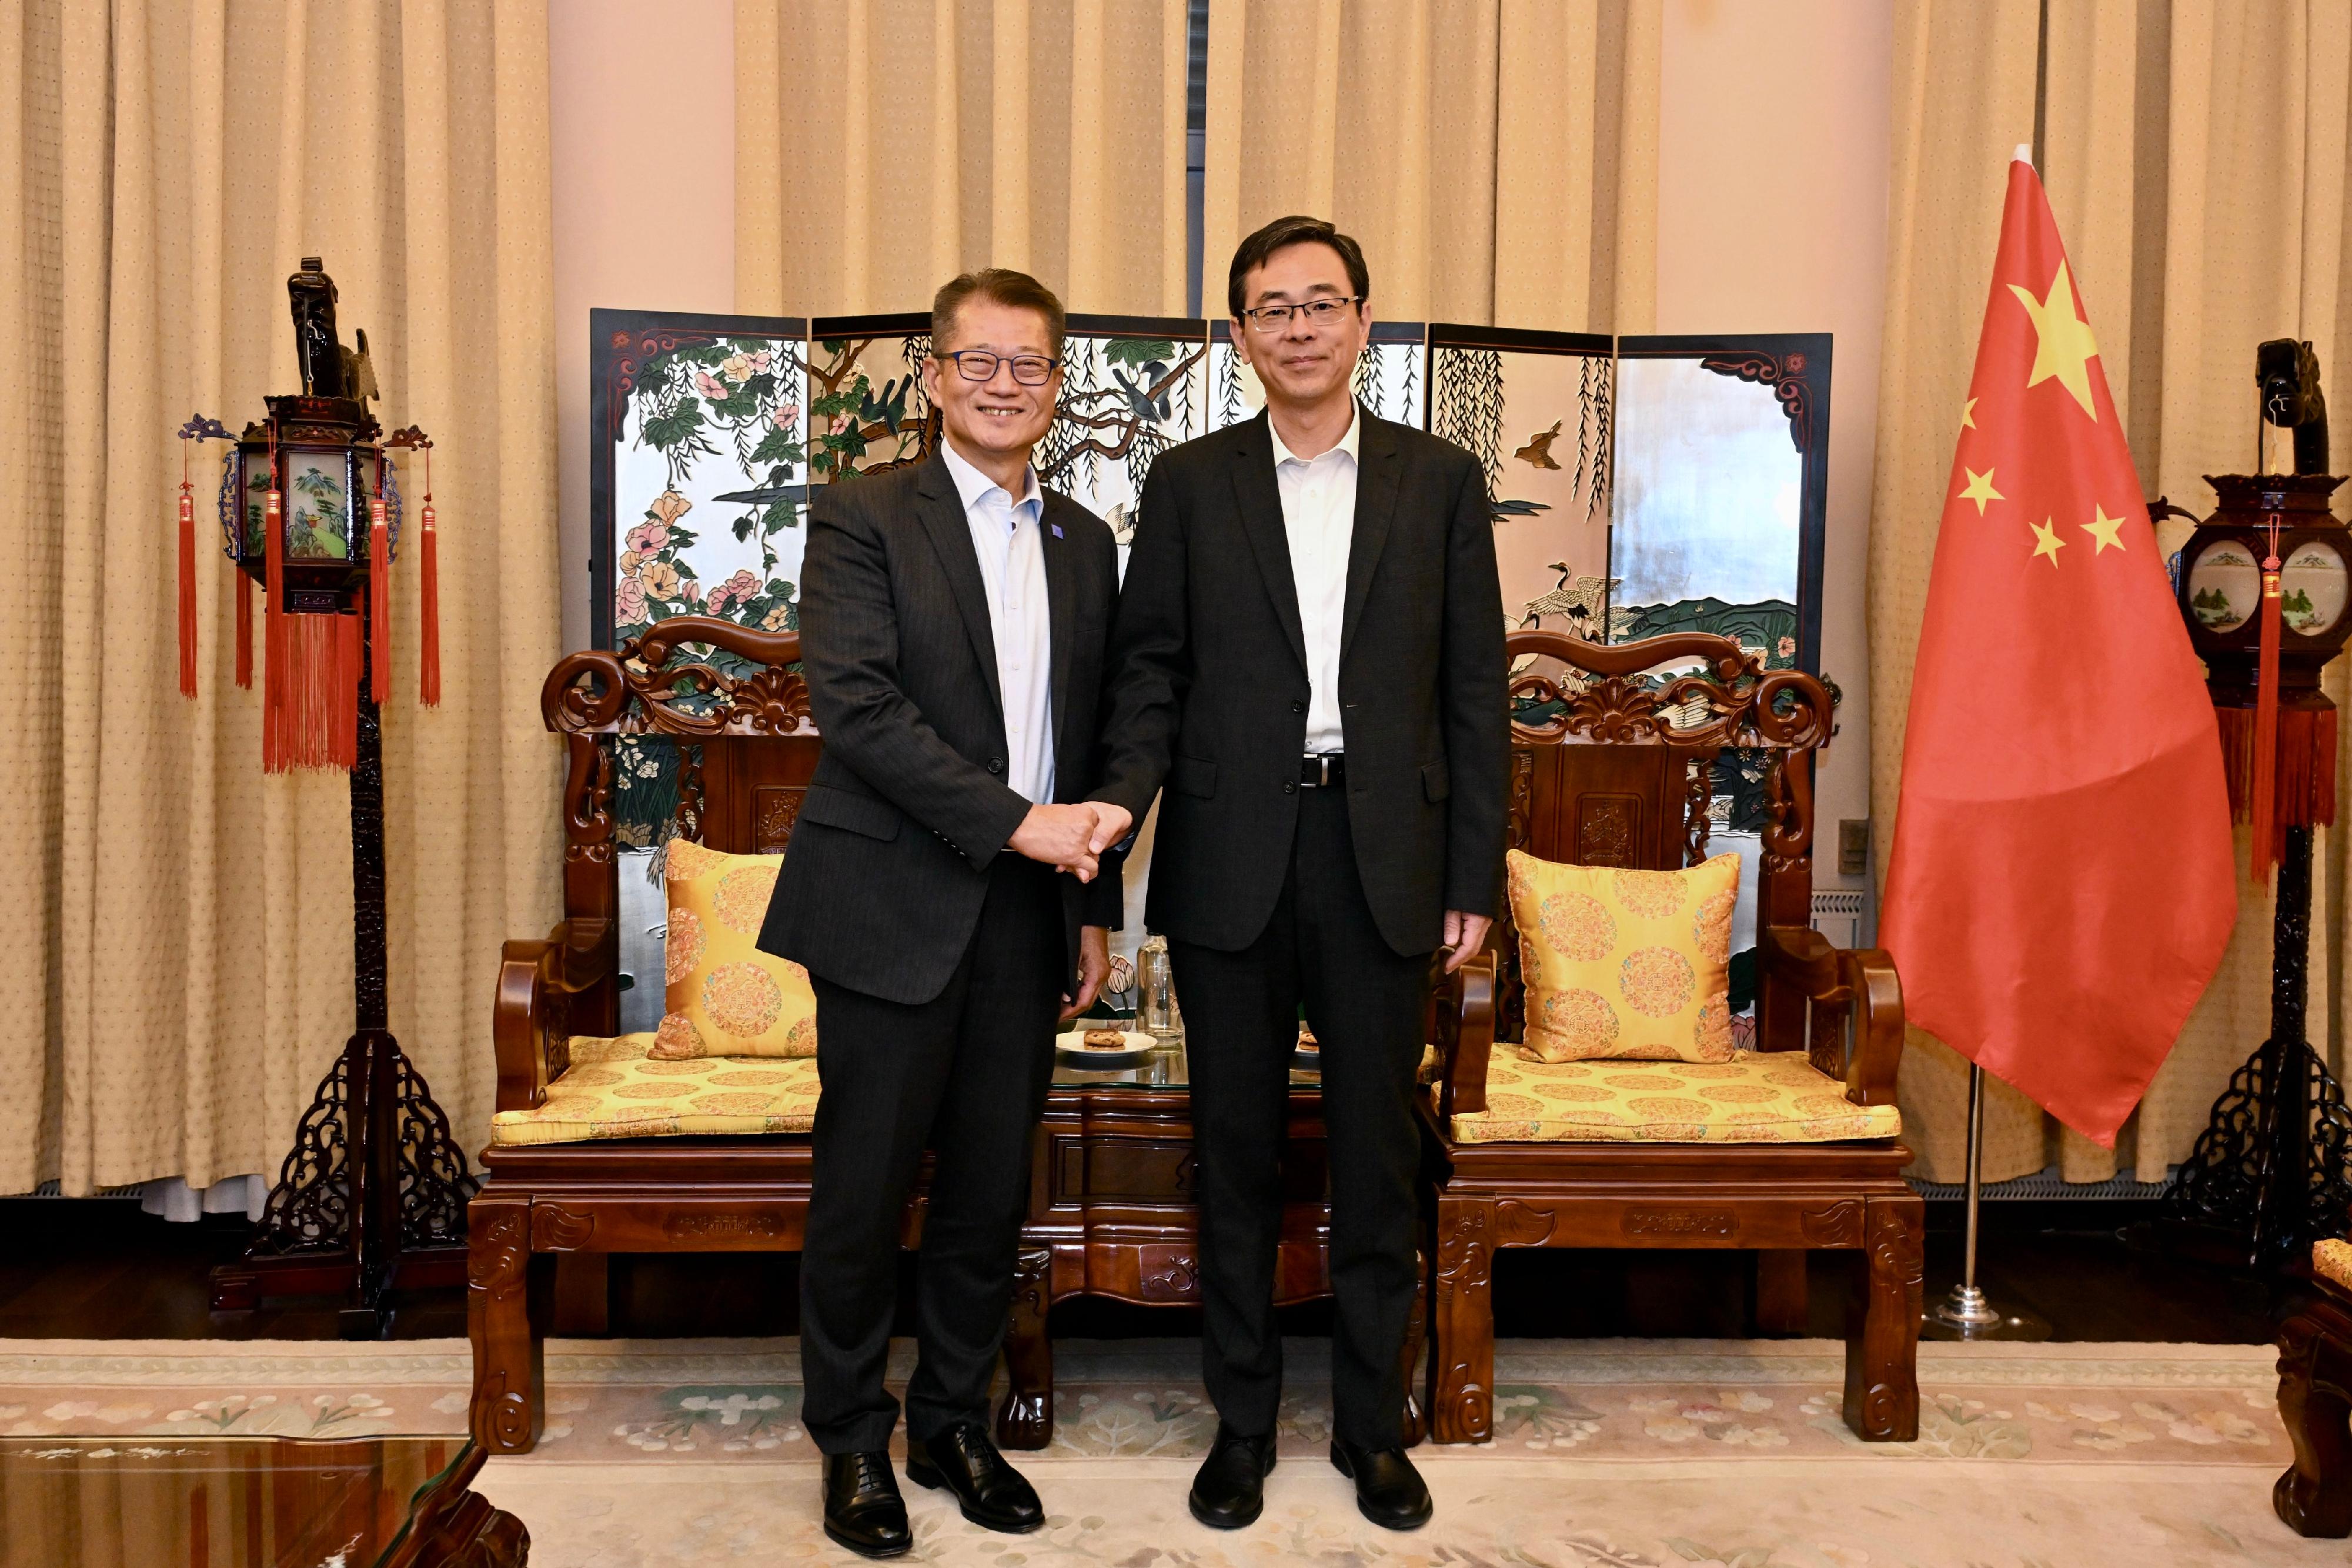 The Financial Secretary, Mr Paul Chan, continued his attendance yesterday (May 3, Tbilisi time) at the 57th Annual Meeting of the Board of Governors of the Asian Development Bank in Tbilisi, Georgia. Photo shows Mr Chan (left) meeting with the Ambassador Extraordinary and Plenipotentiary of the People's Republic of China to Georgia, Mr Zhou Qian (right).